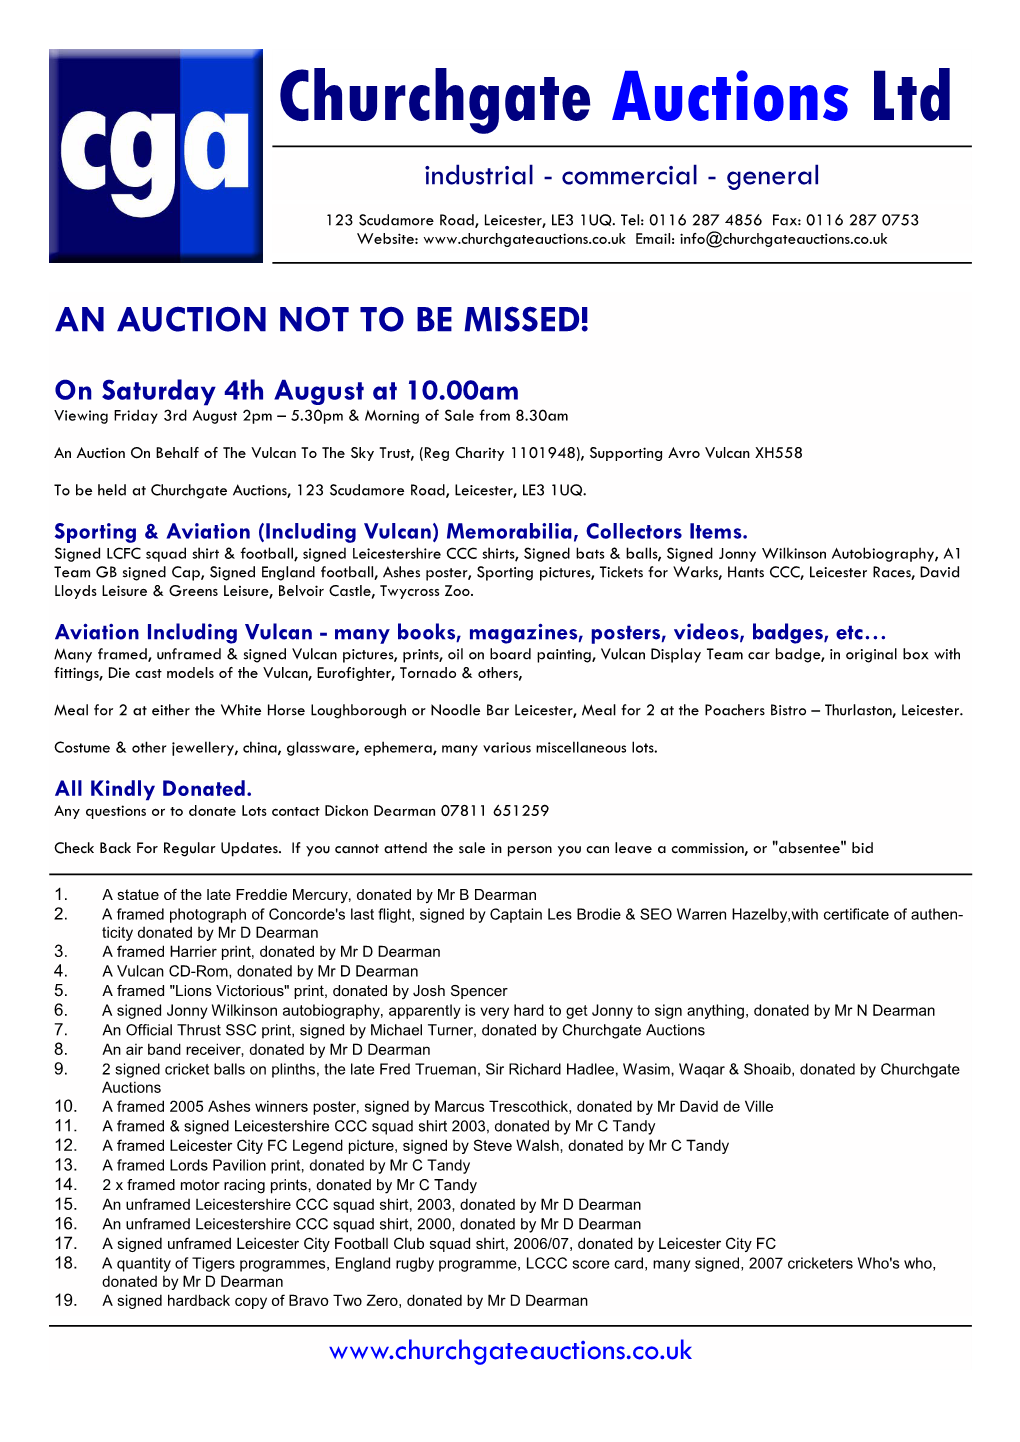 Churchgate Auctions Ltd Industrial - Commercial - General